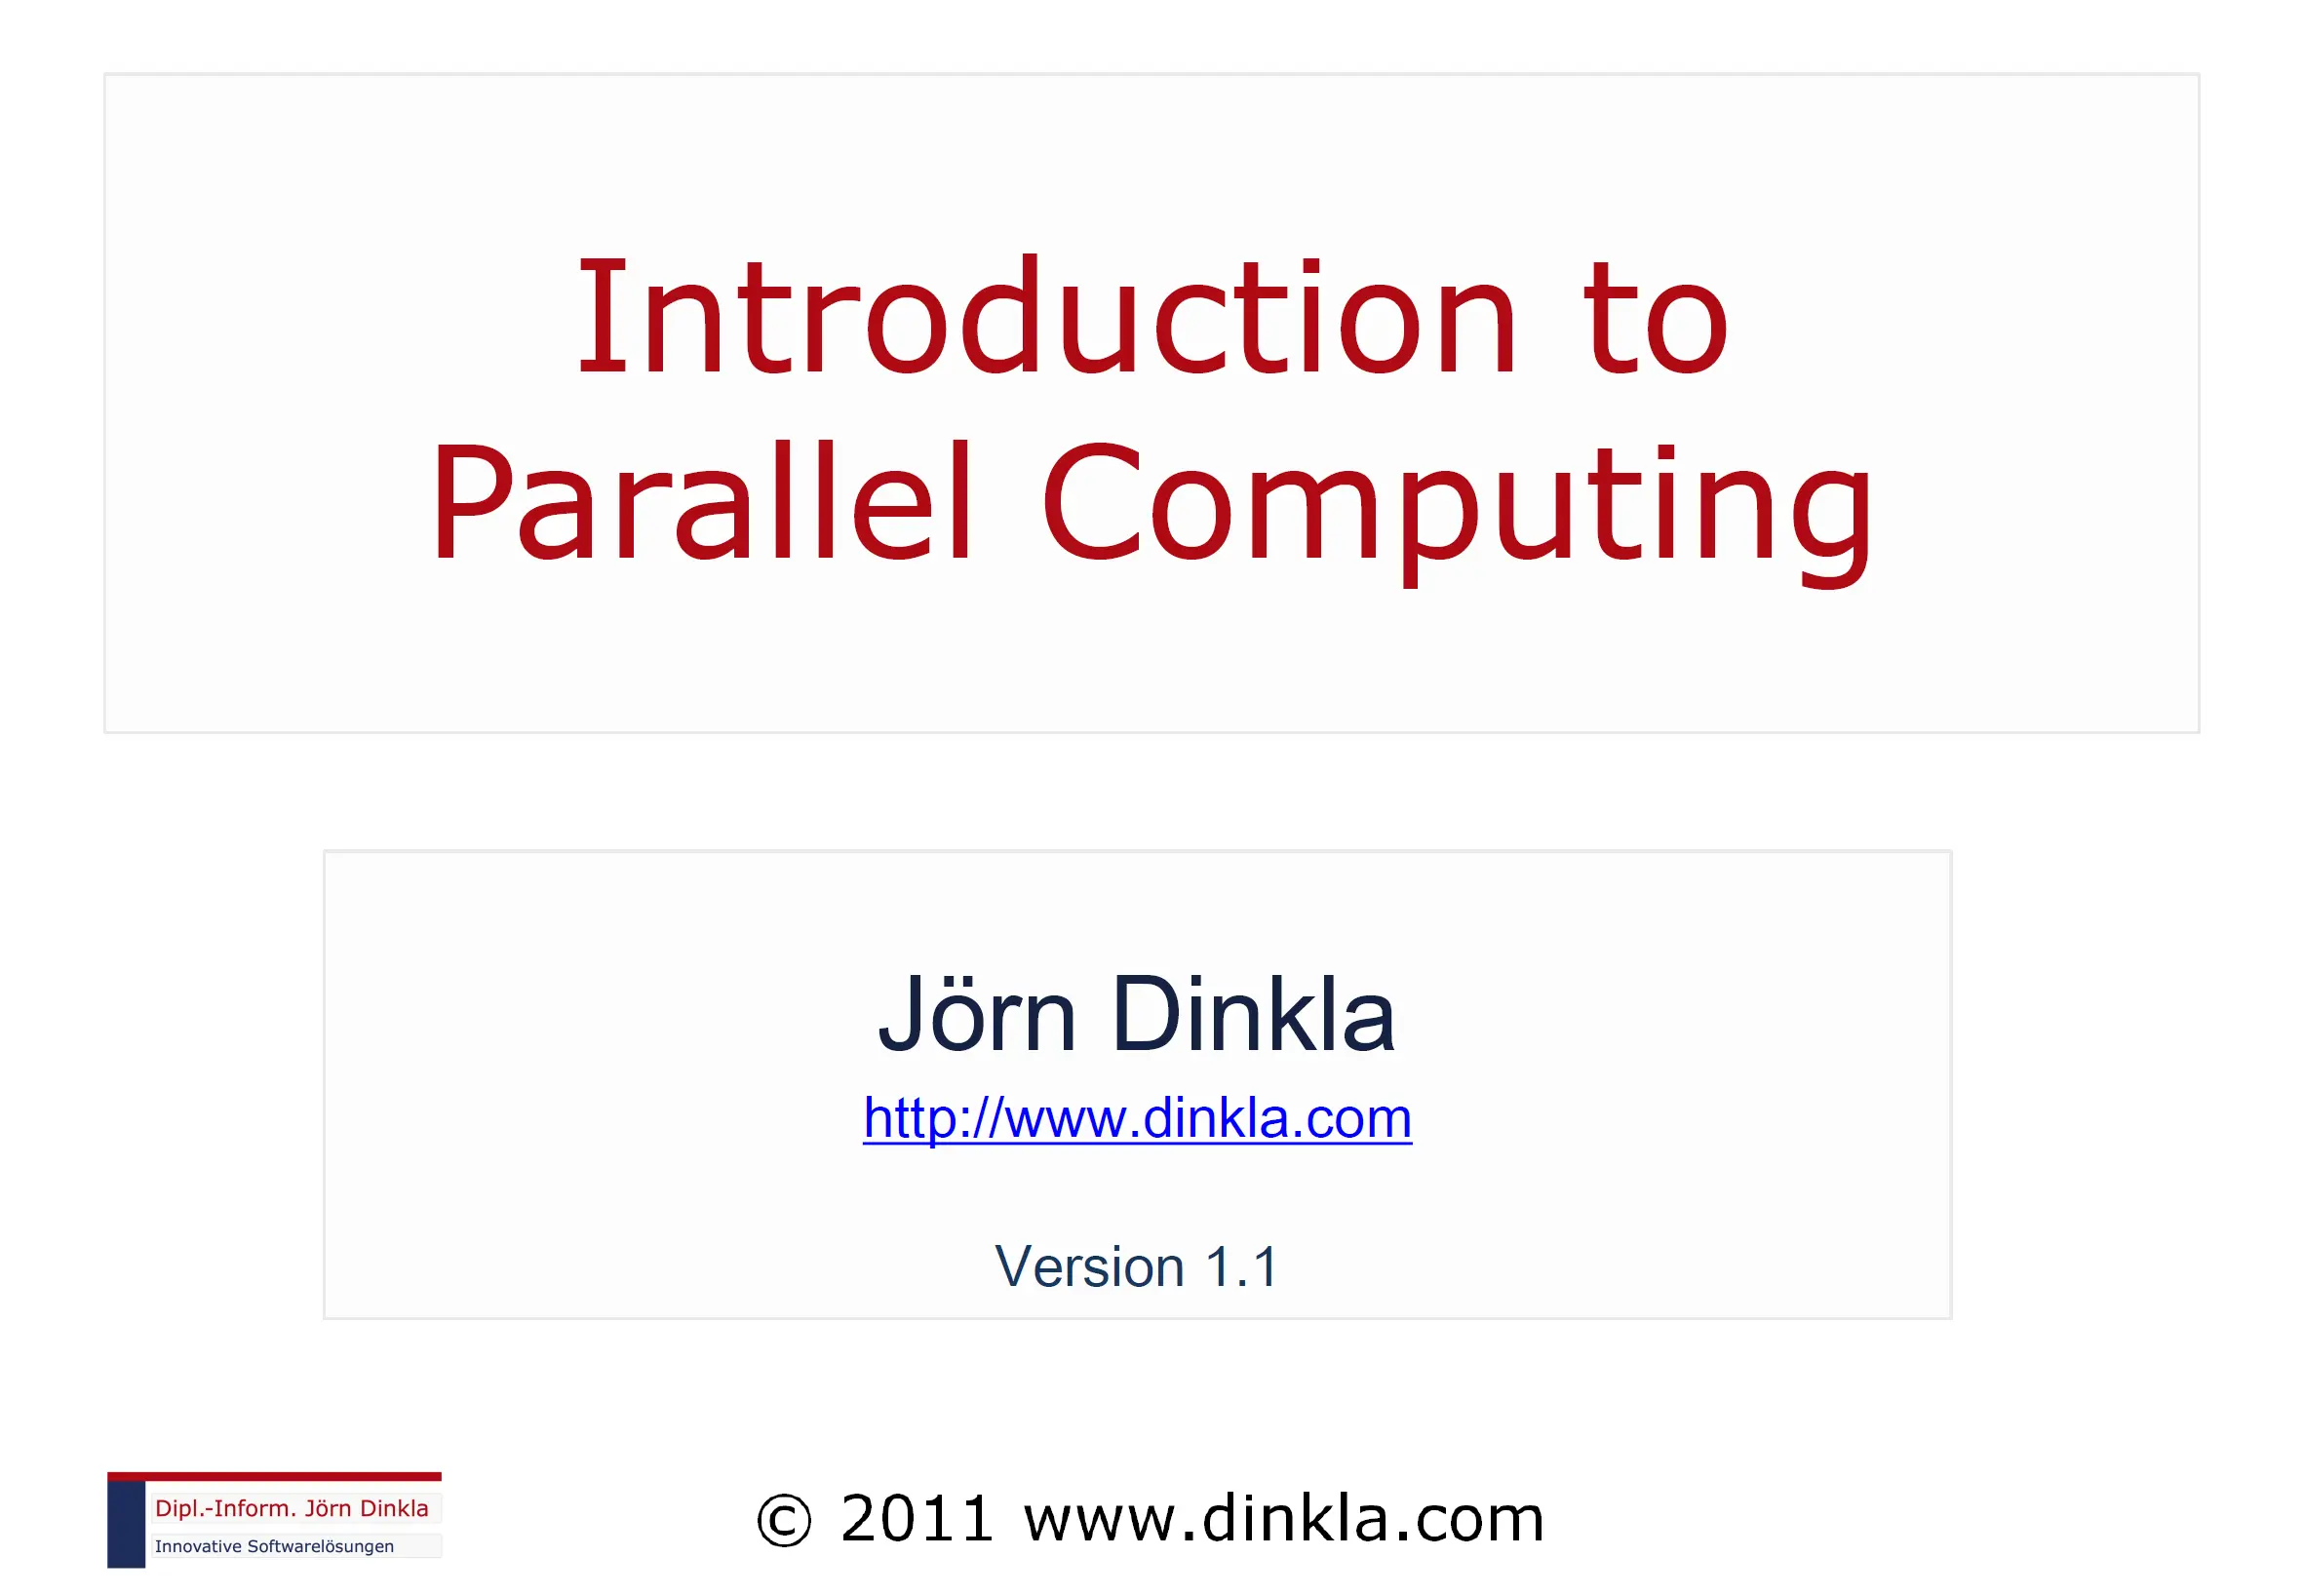 Slides: 'Introduction to Parallel Computing'